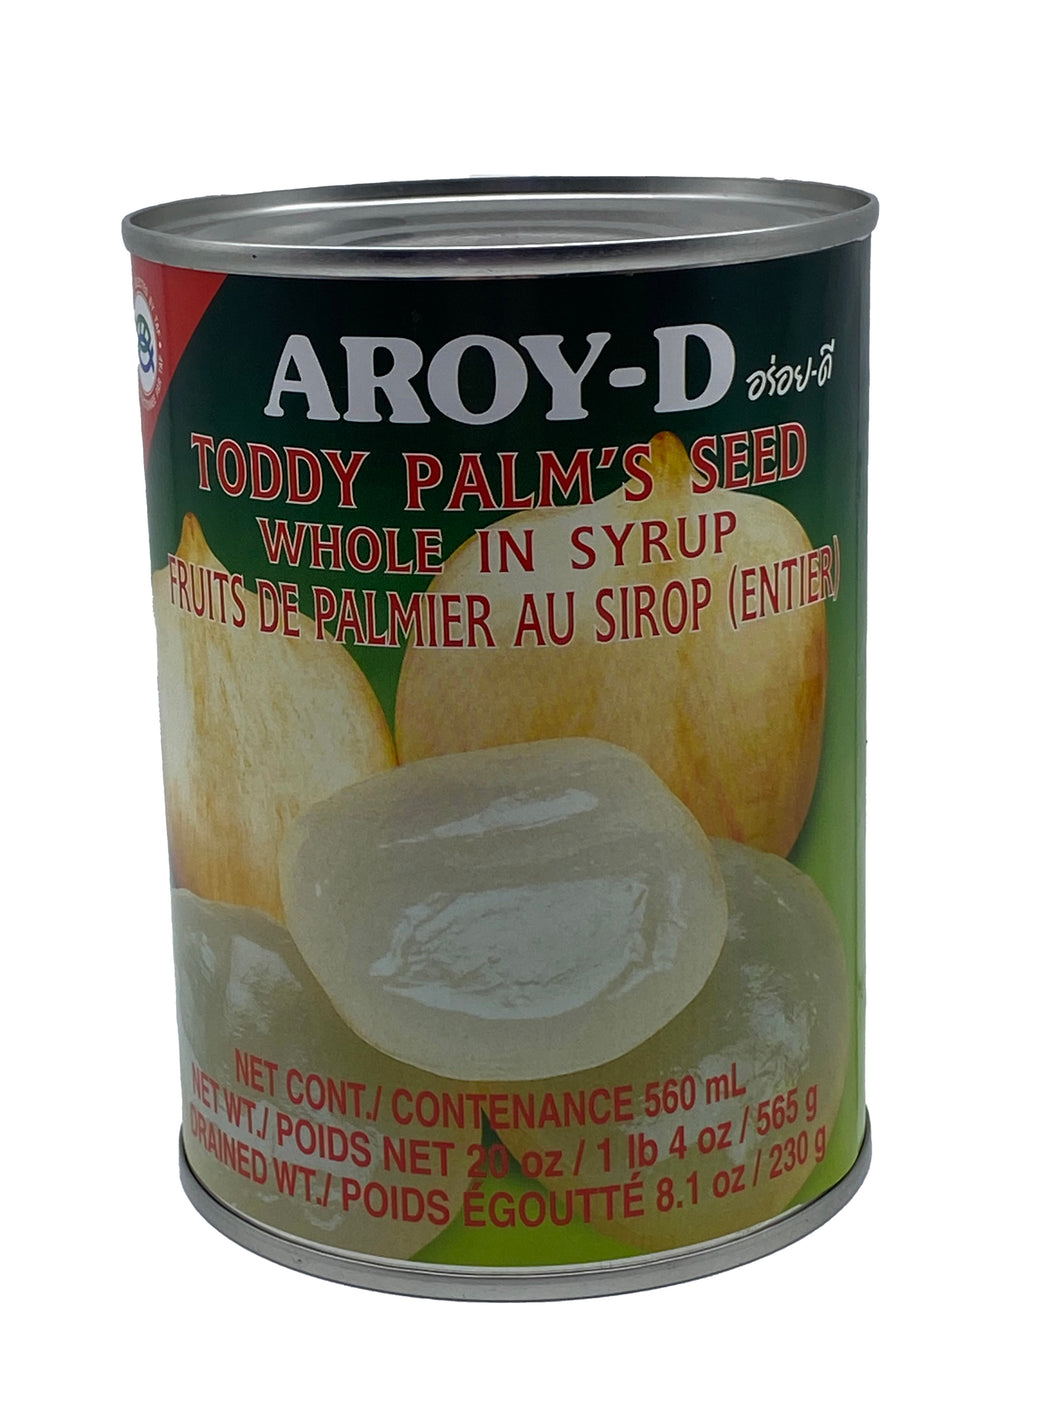 Aroy-D Toddy Palm's Seed Whole in Syrup